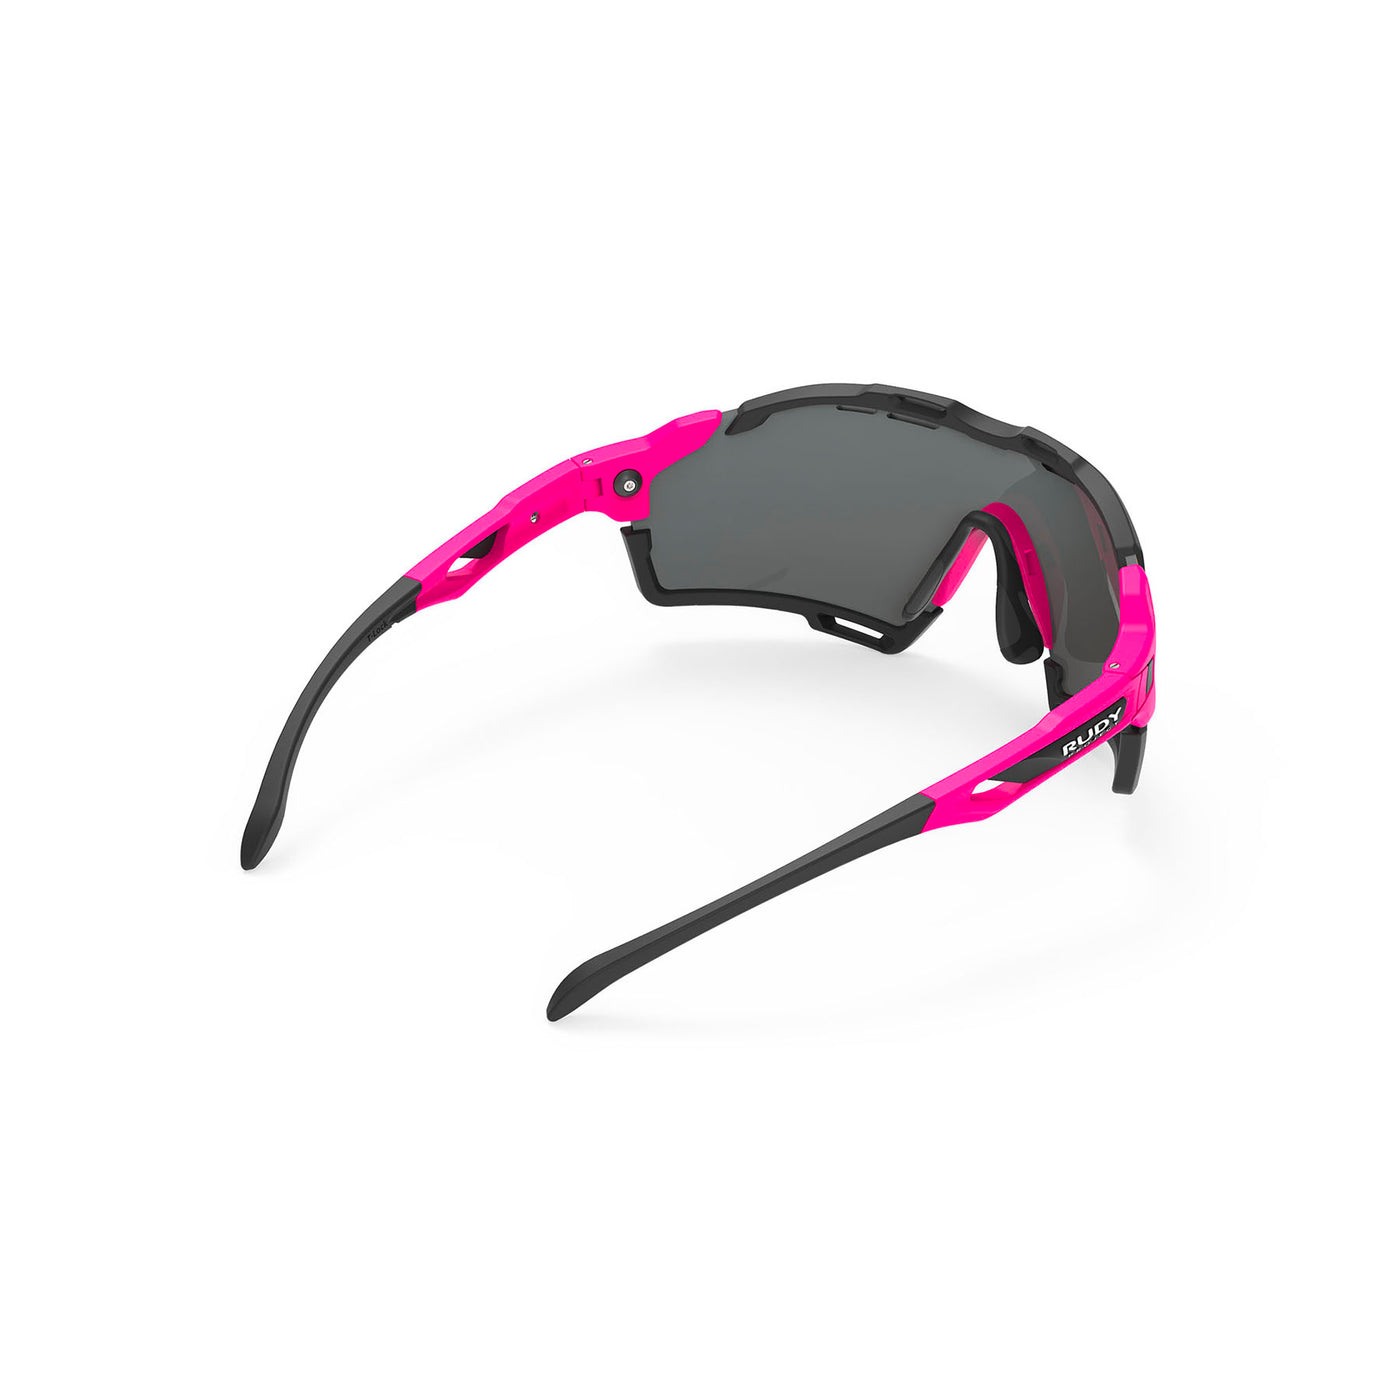 Rudy Project Cutline running and cycling sport and sport prescription sunglasses#color_cutline-pink-fluo-matte-frame-with-multilaser-orange-lenses-black-bumpers